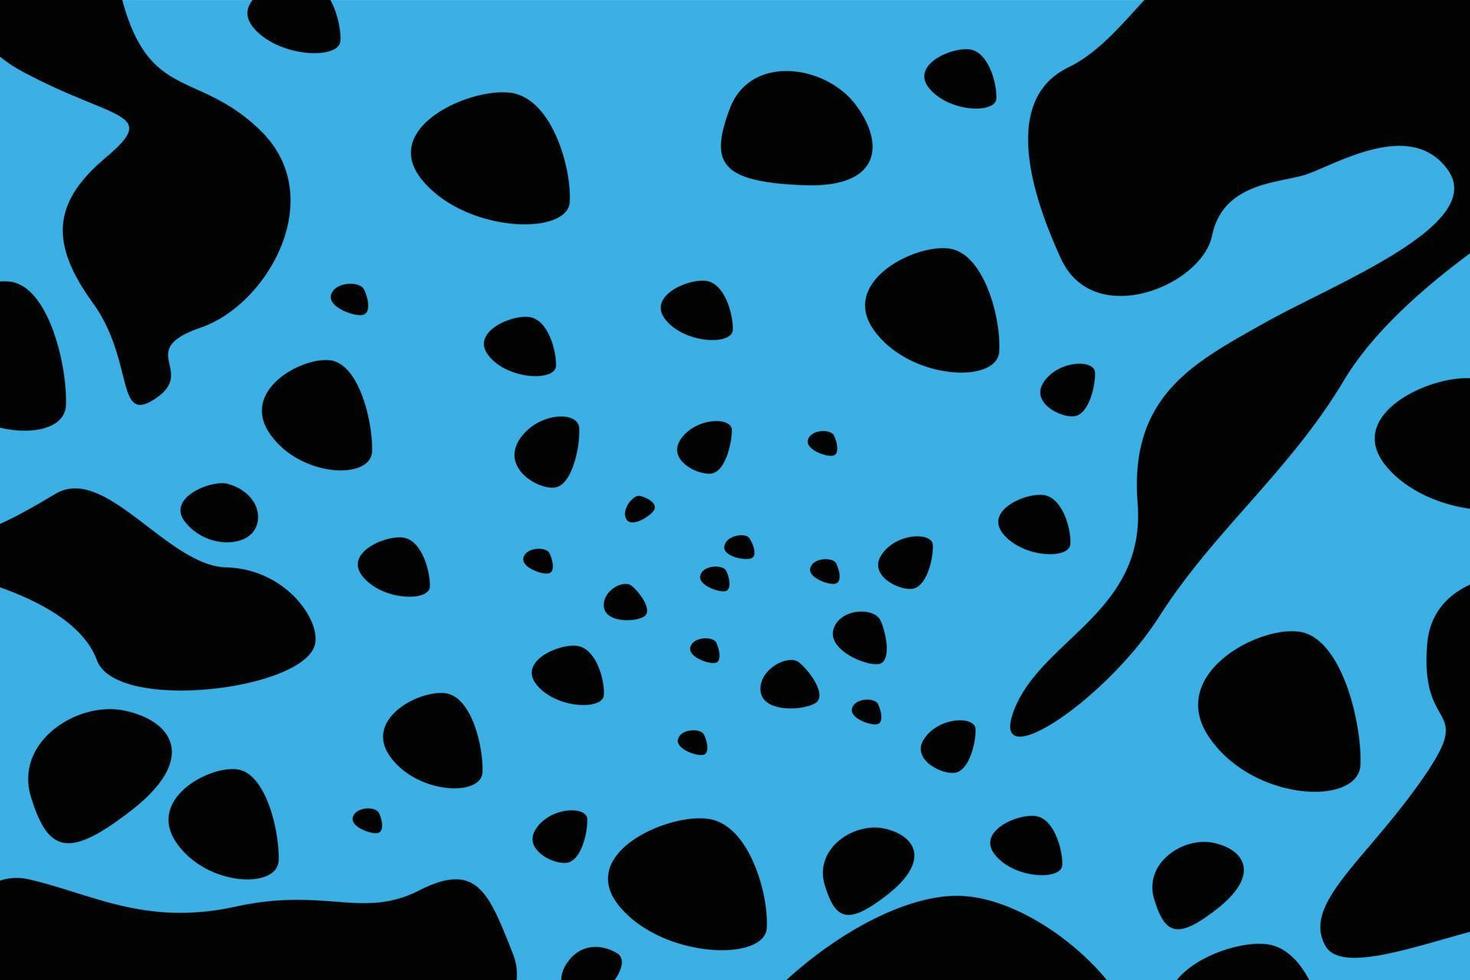 Abstract blue background with black spot pattern vector